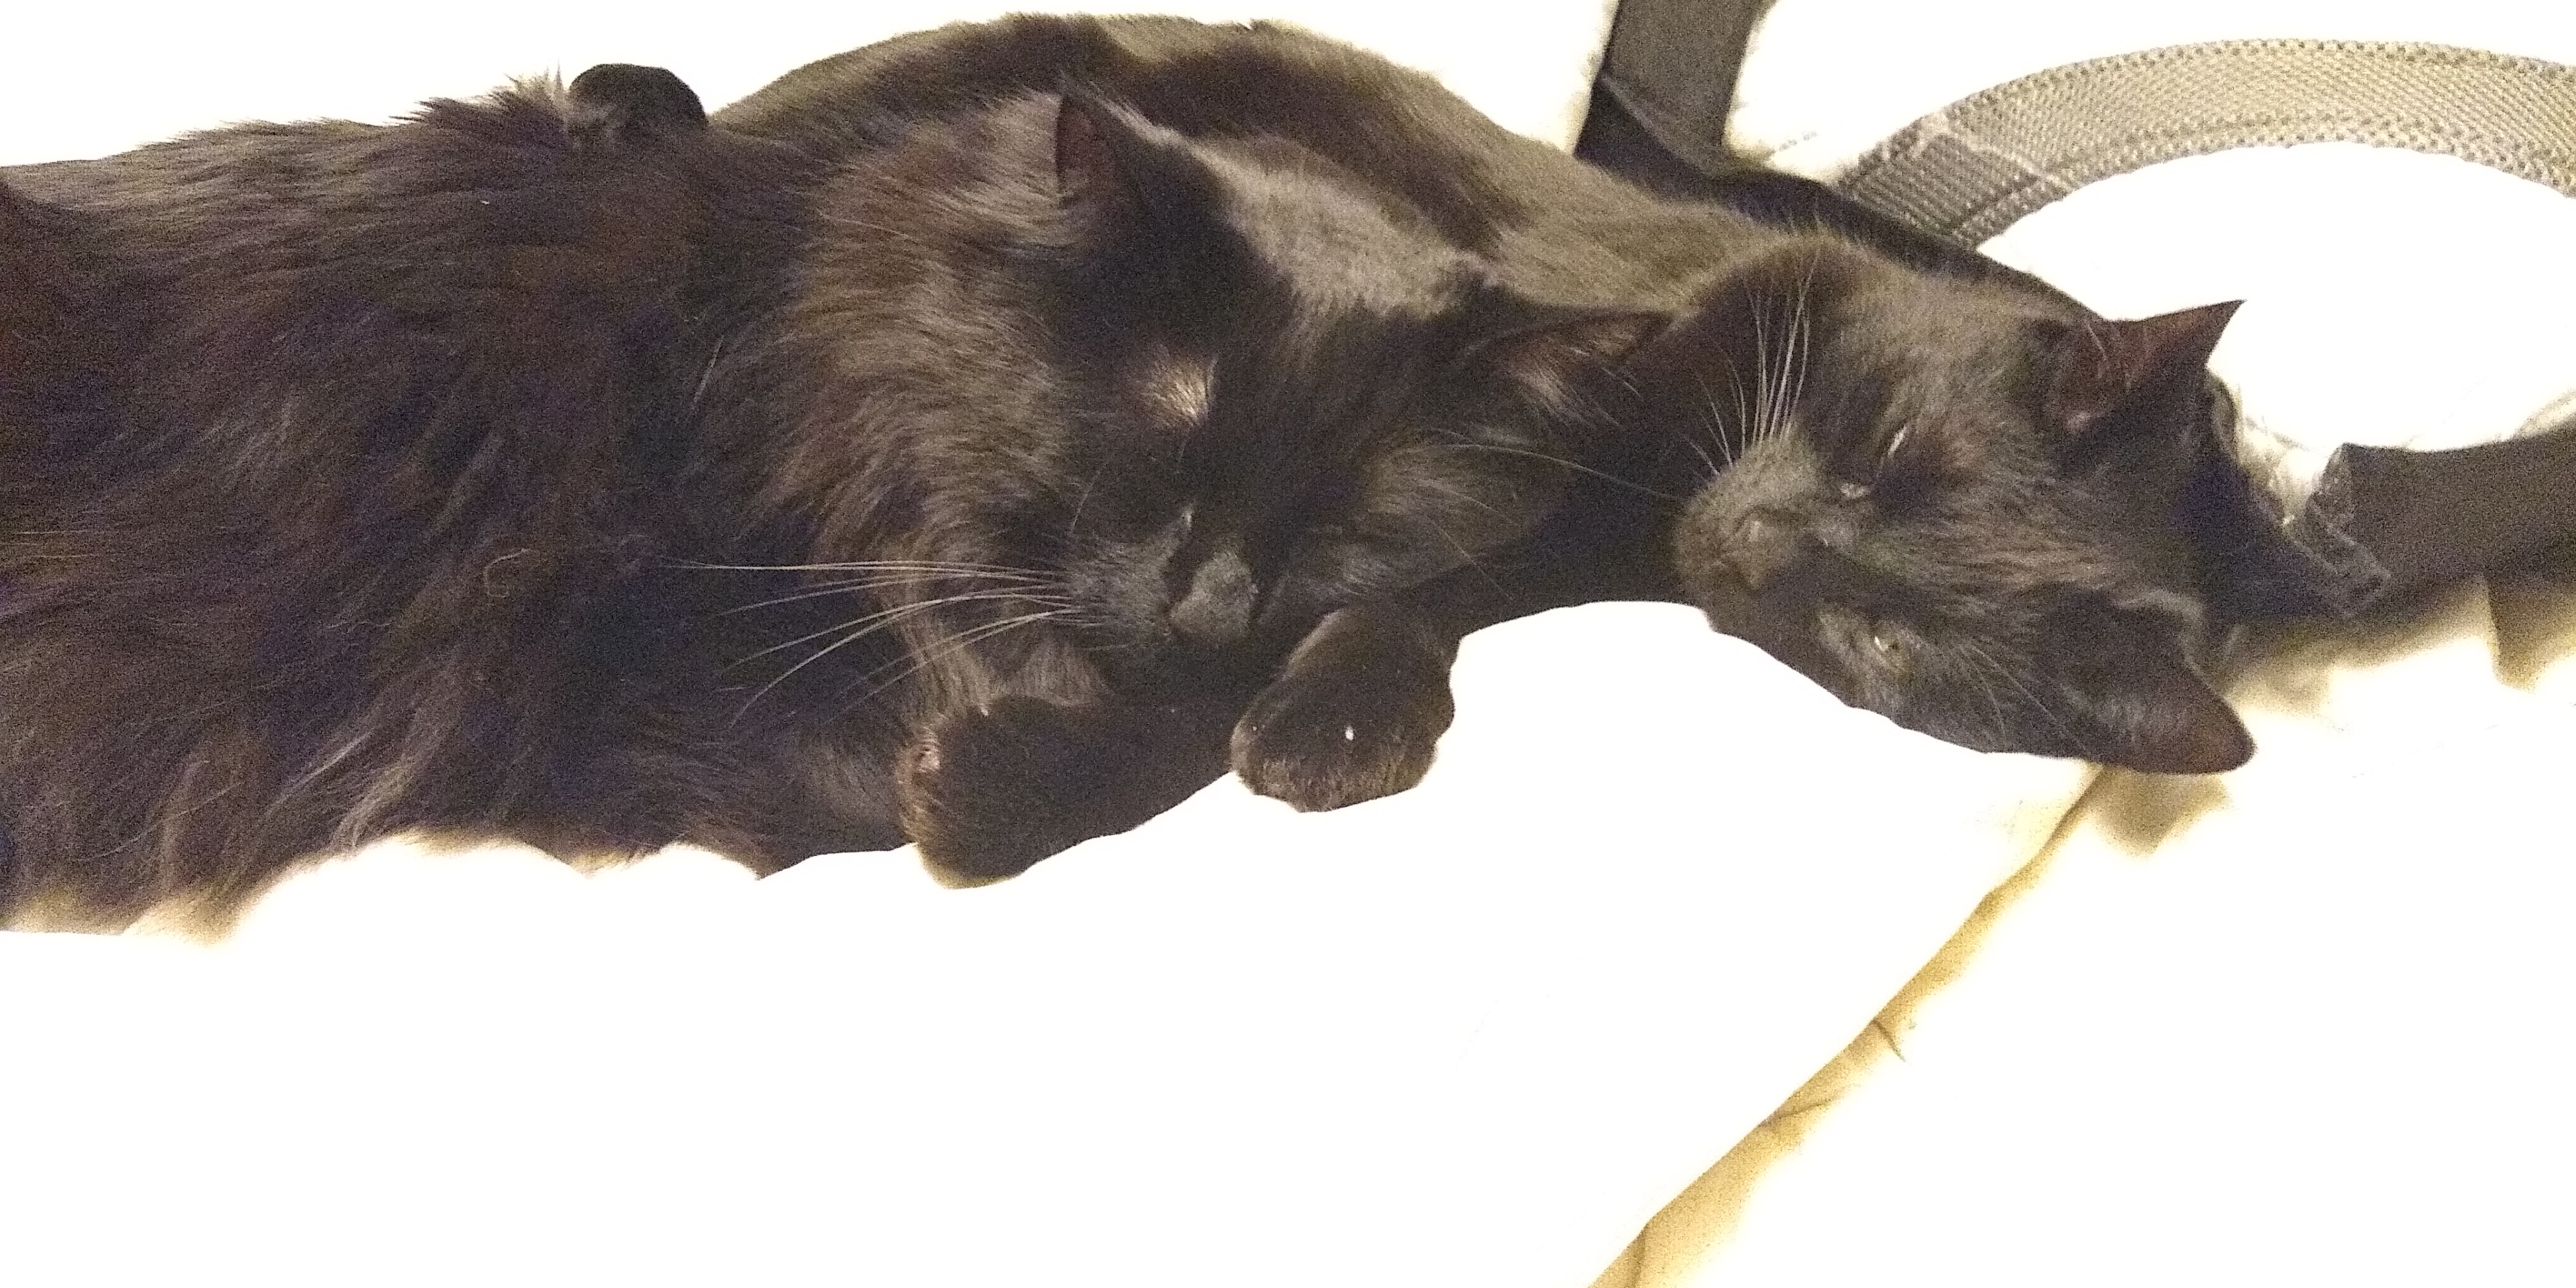 A photo of two black cats, one short-haired and one long-haired, sleeping in a pile. End ID.